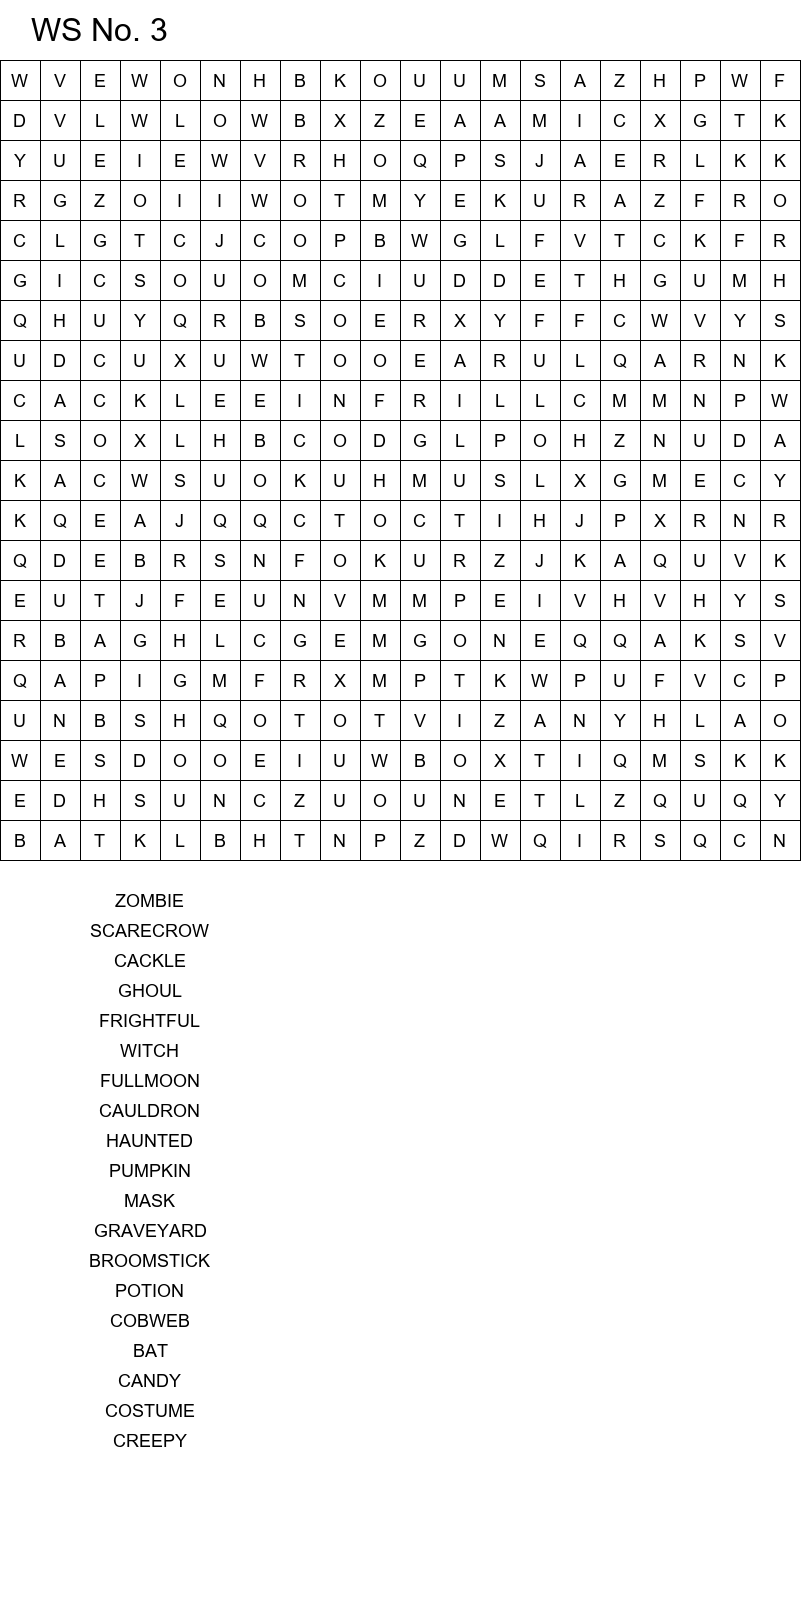 Challenging Halloween word search for teens size 20x20 No 3